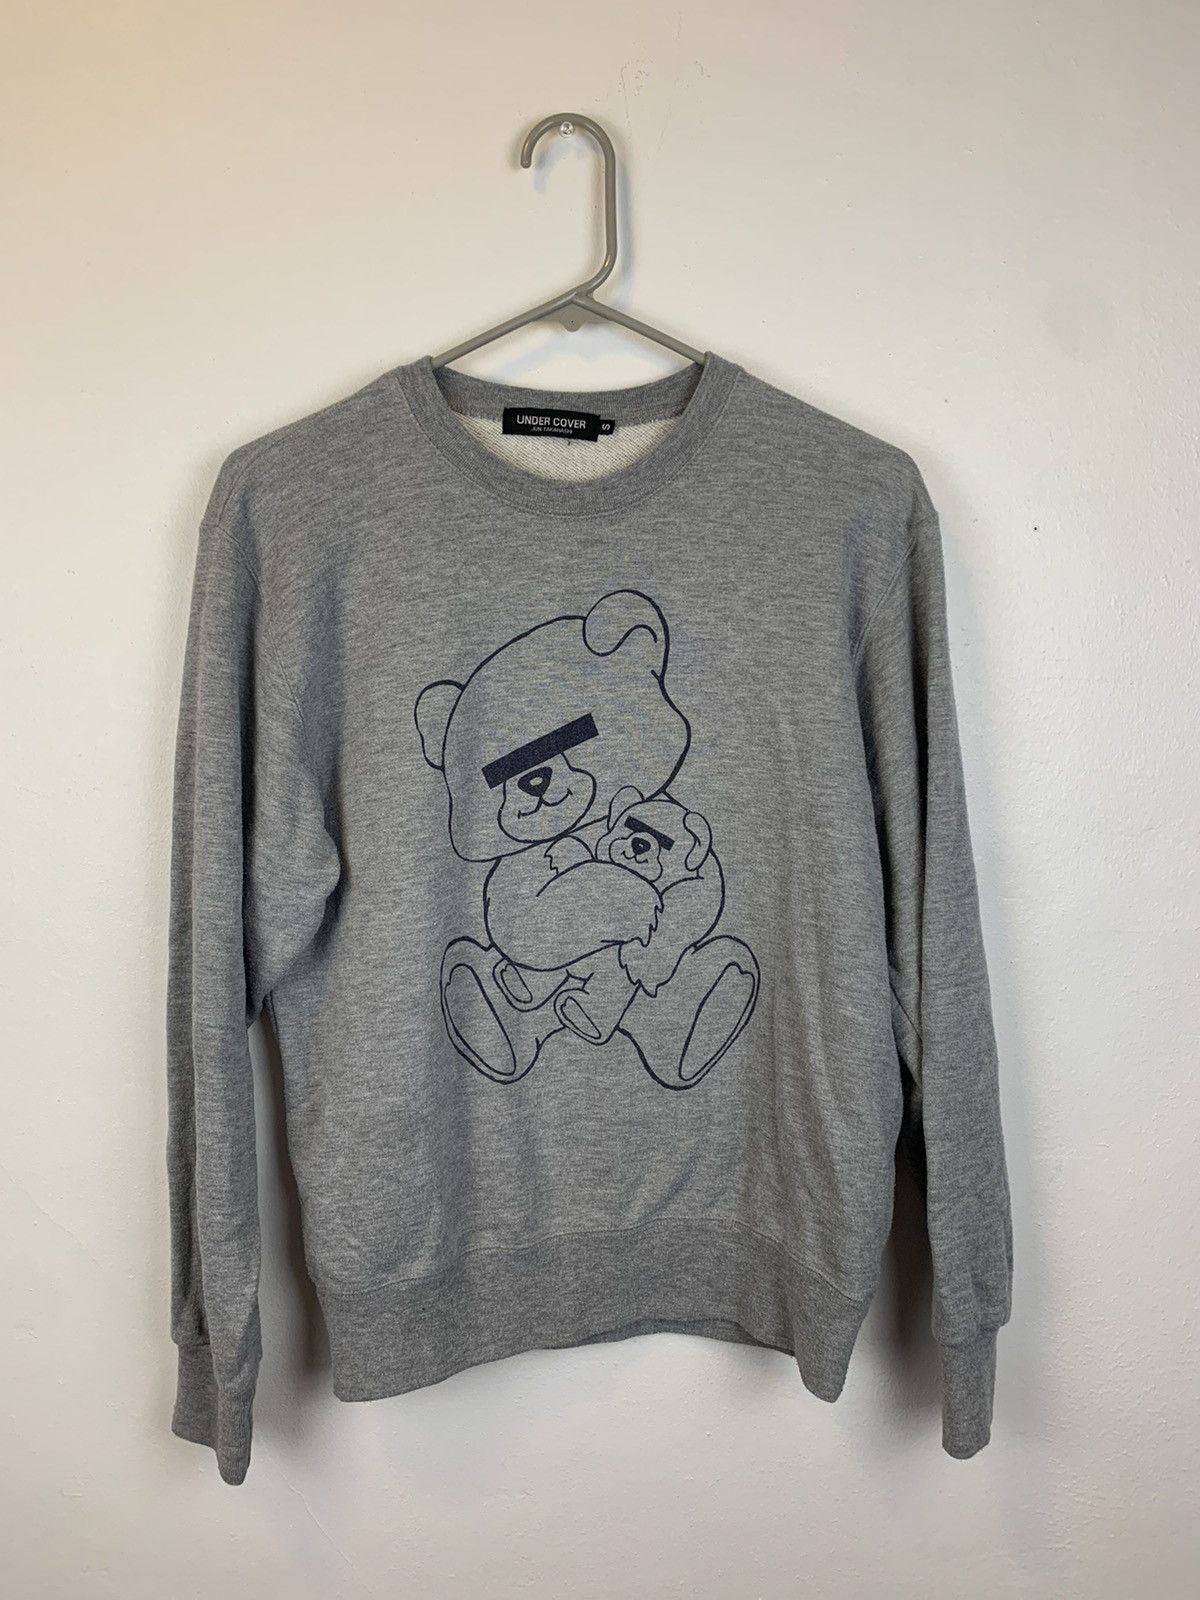 Undercover Undercover bear sweater Size US S / EU 44-46 / 1 - 1 Preview